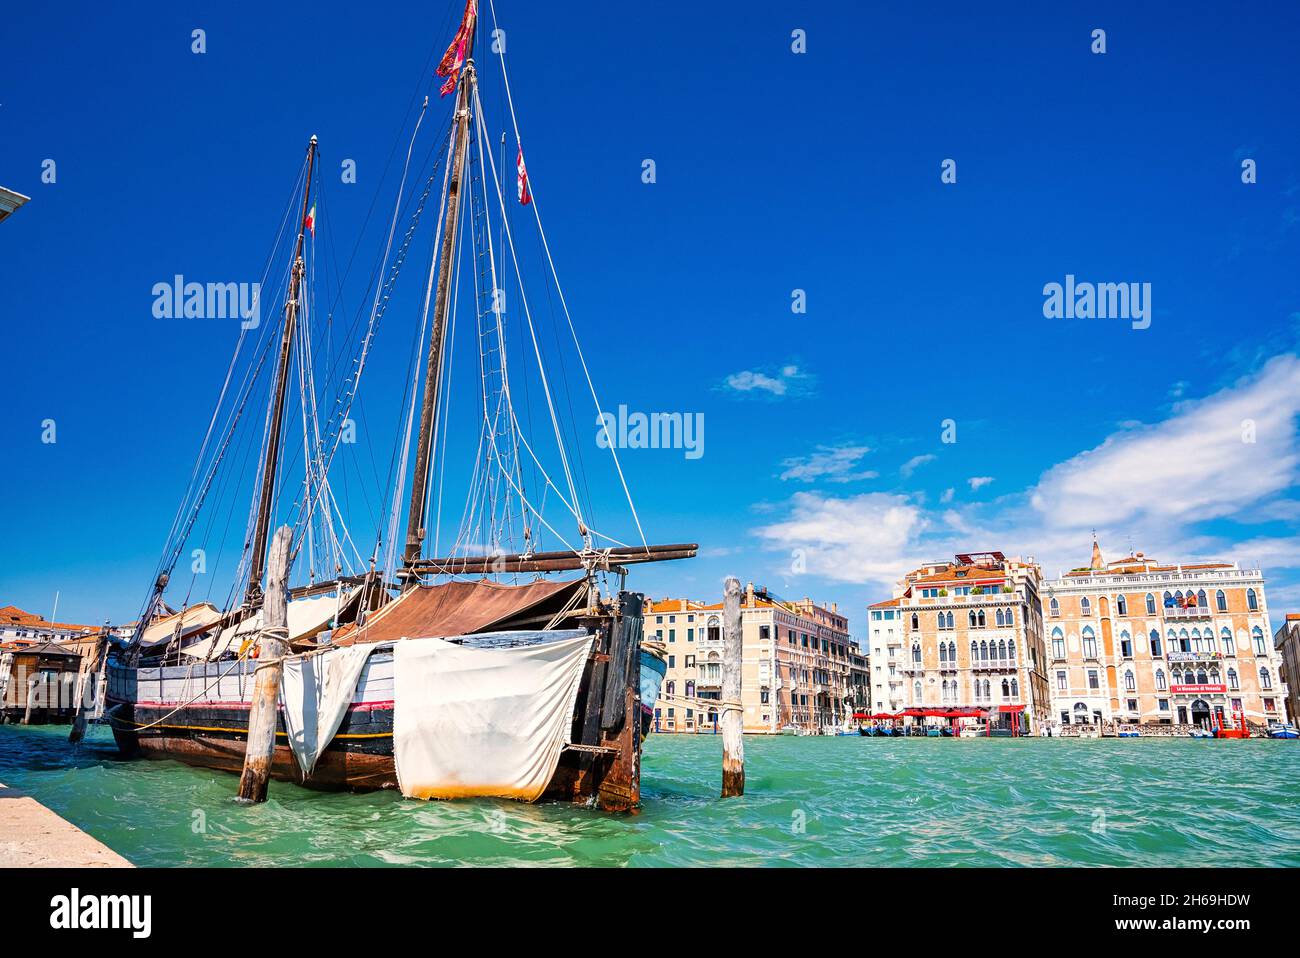 Ancient sailing ship moored on grand canal with buildings in background Stock Photo